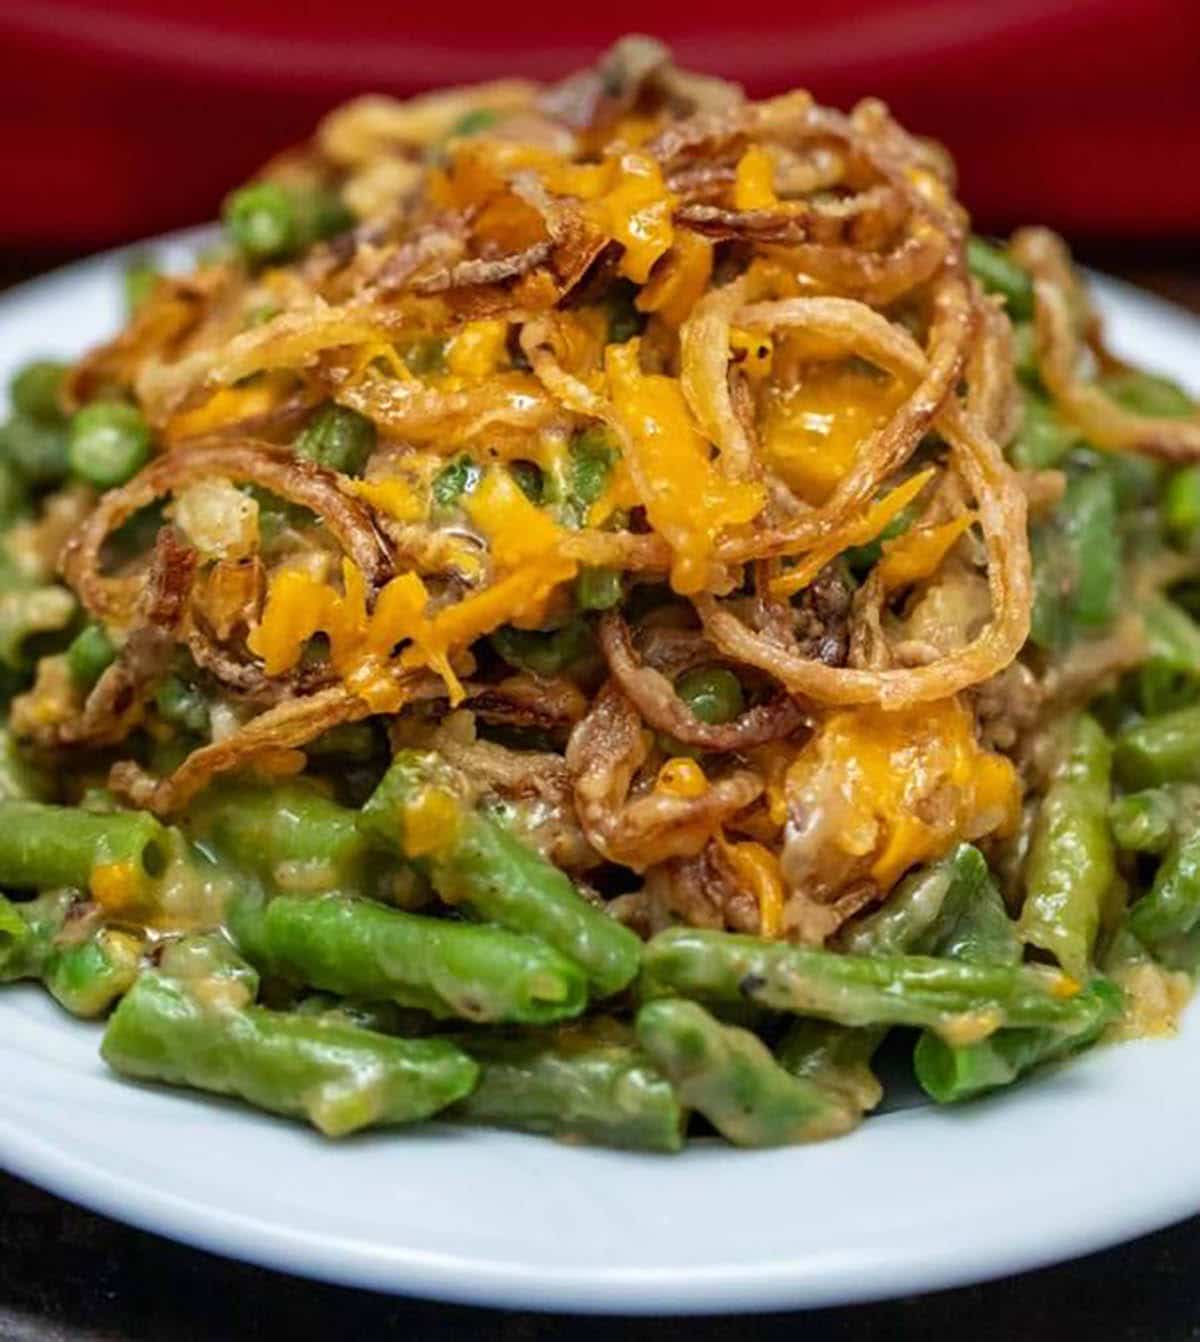 Cheesy Green Bean Casserole topped with cheese and fried onions